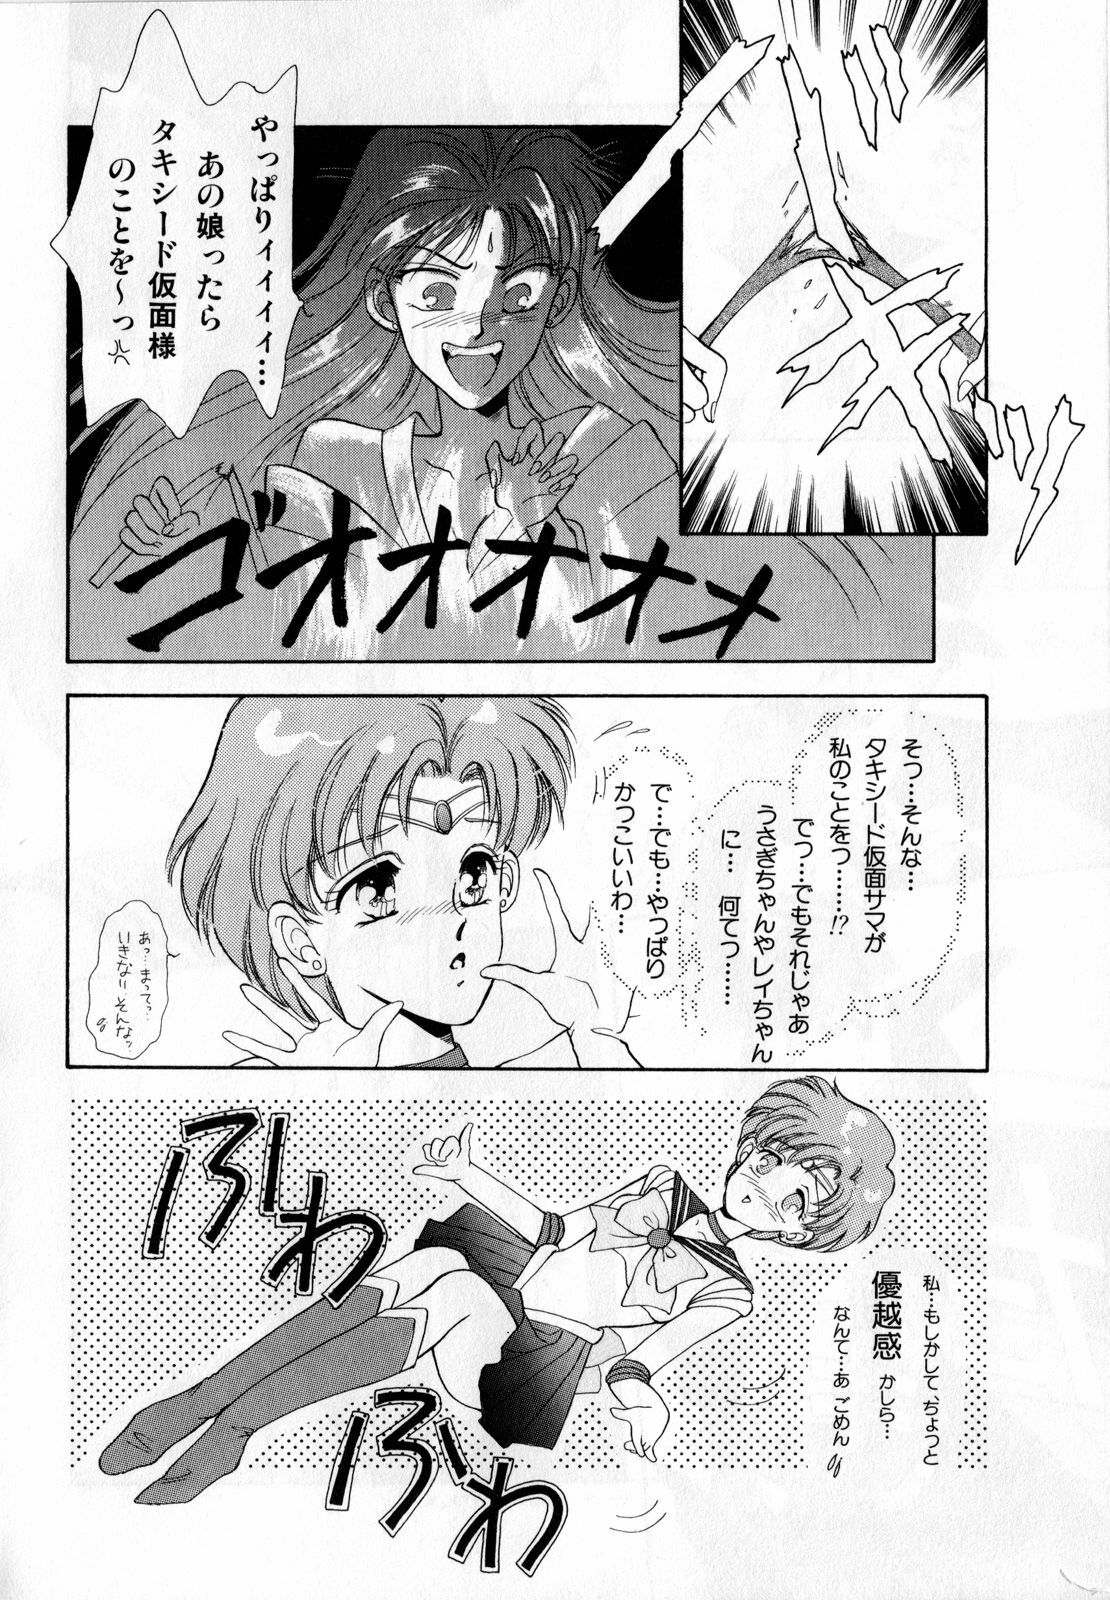 [Anthology] Lunatic Party 1 (Sailor Moon) page 9 full